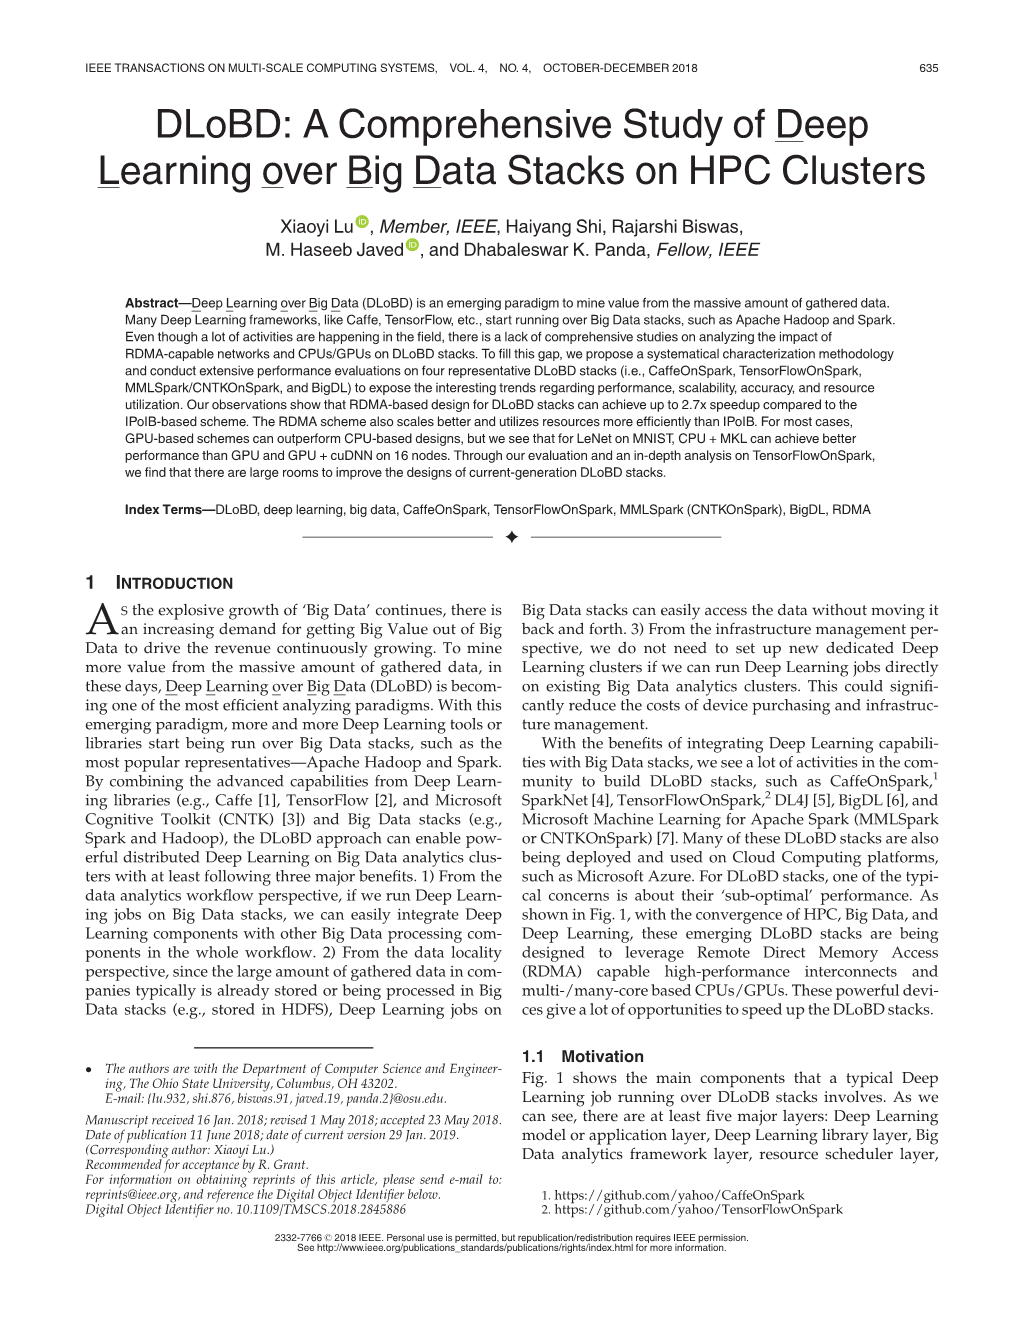 A Comprehensive Study of Deep Learning Over Big Data Stacks on HPC Clusters